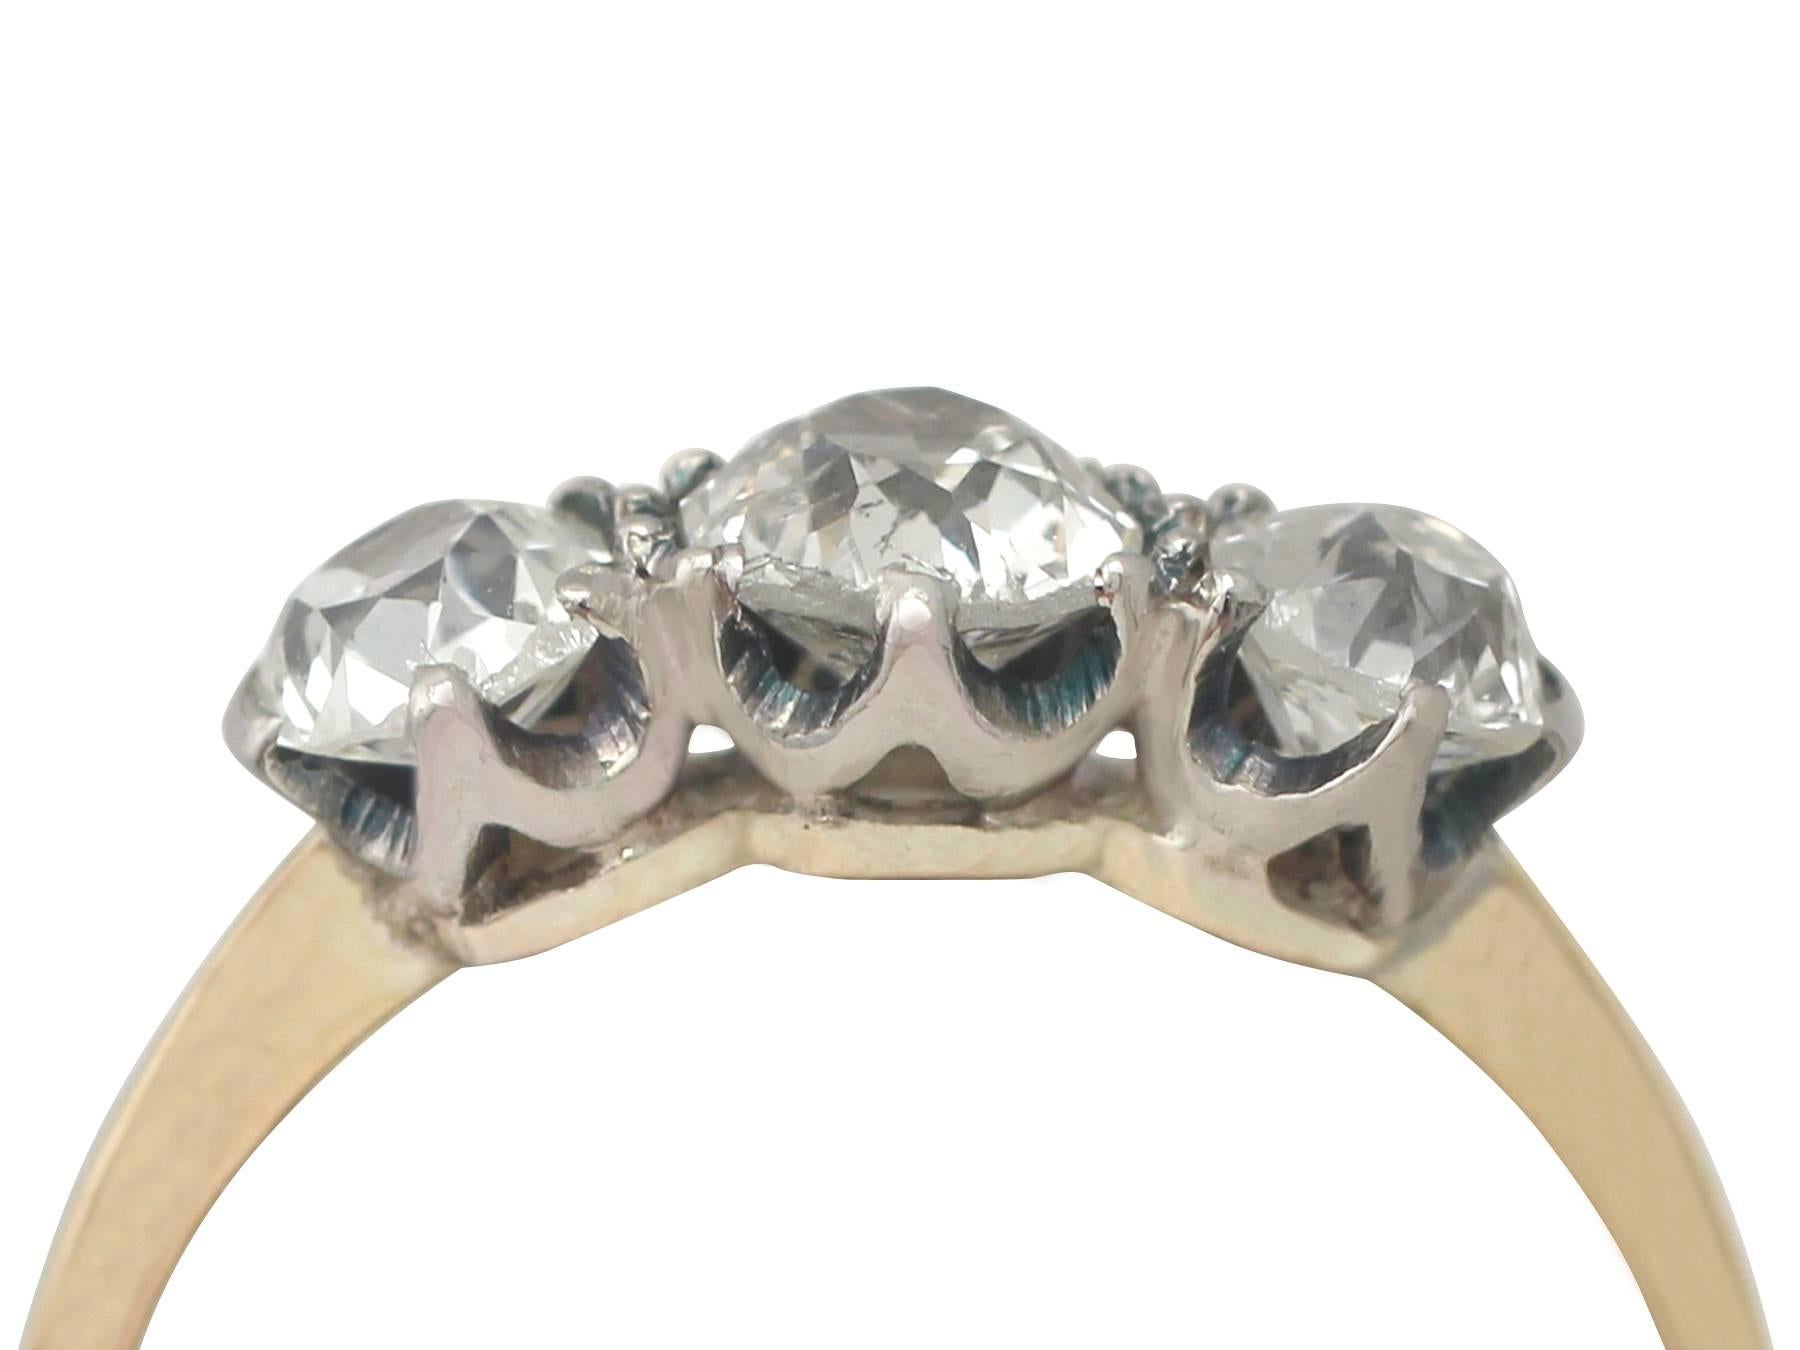 This fine and impressive antique 1920's diamond ring has been crafted in 18k yellow gold with a platinum setting.

The pierced decorated, platinum setting is ornamented with a feature 0.65 ct Old European round cut diamond

The feature diamond